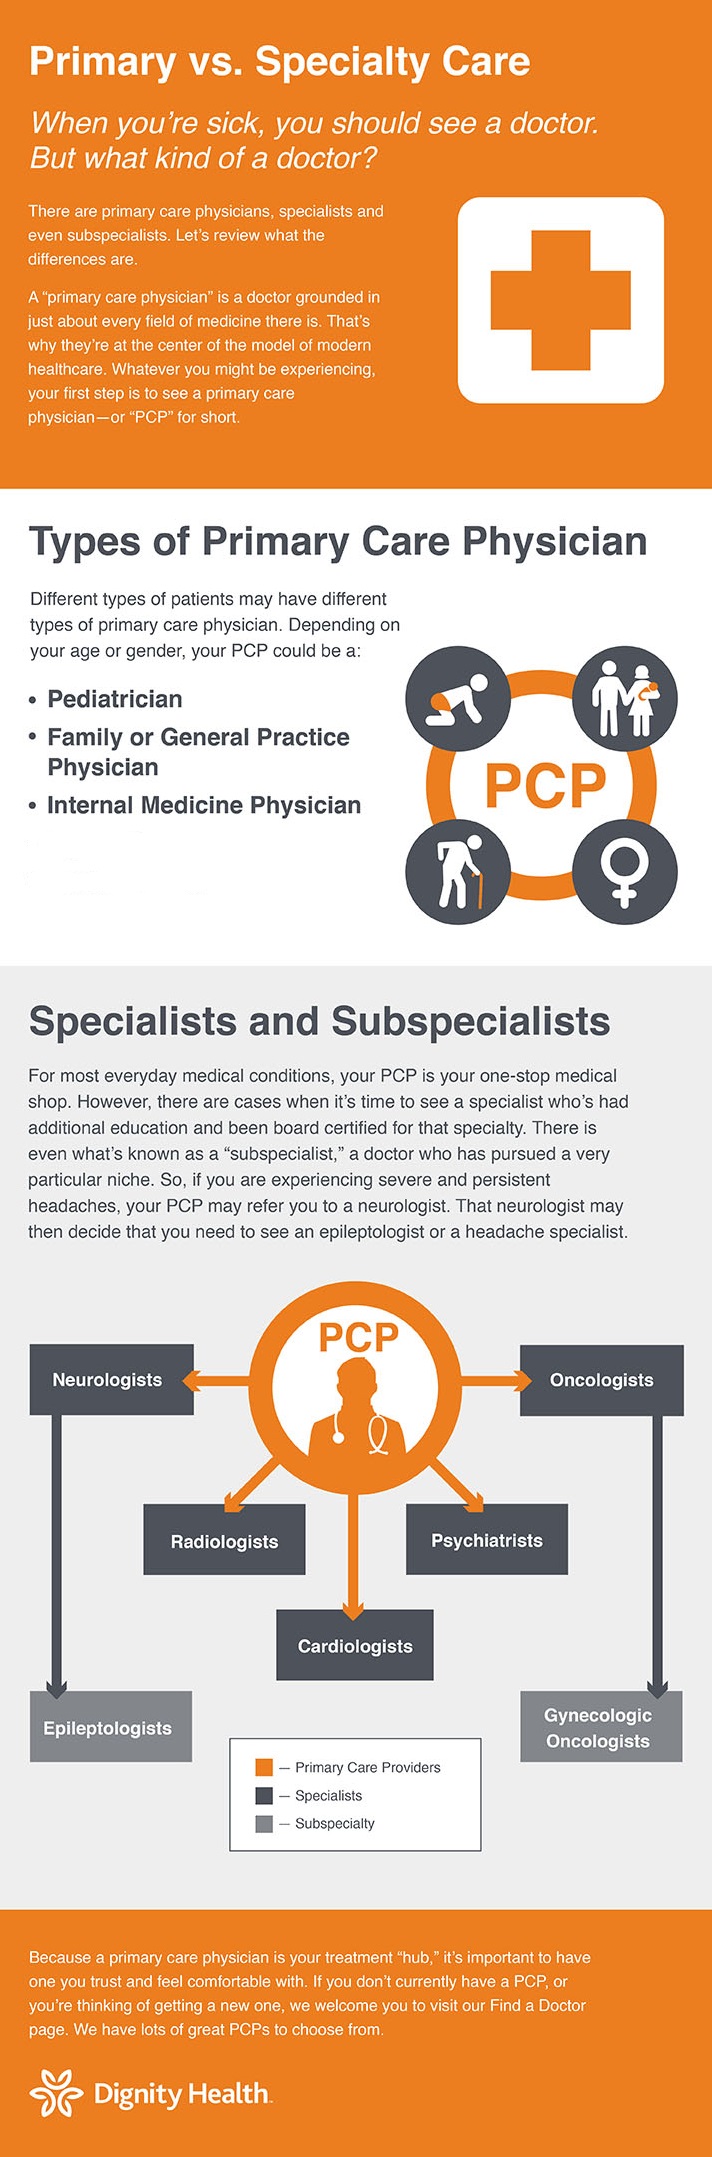 Primary Care Vs Specialty Care Physicians